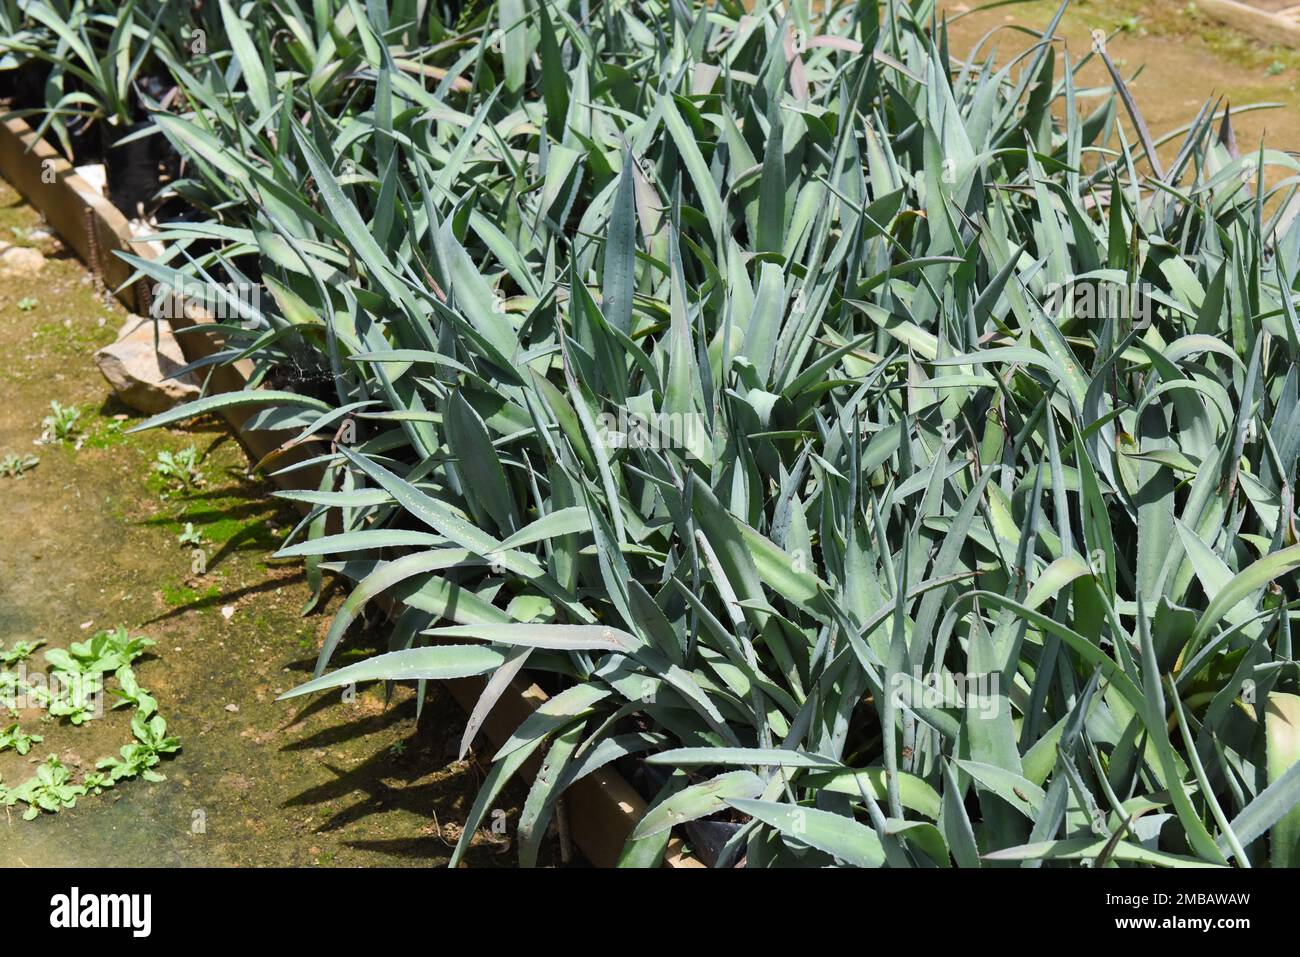 Small agave plants destined to Mezcal production in many years, Oaxaca valley, Mexico Stock Photo